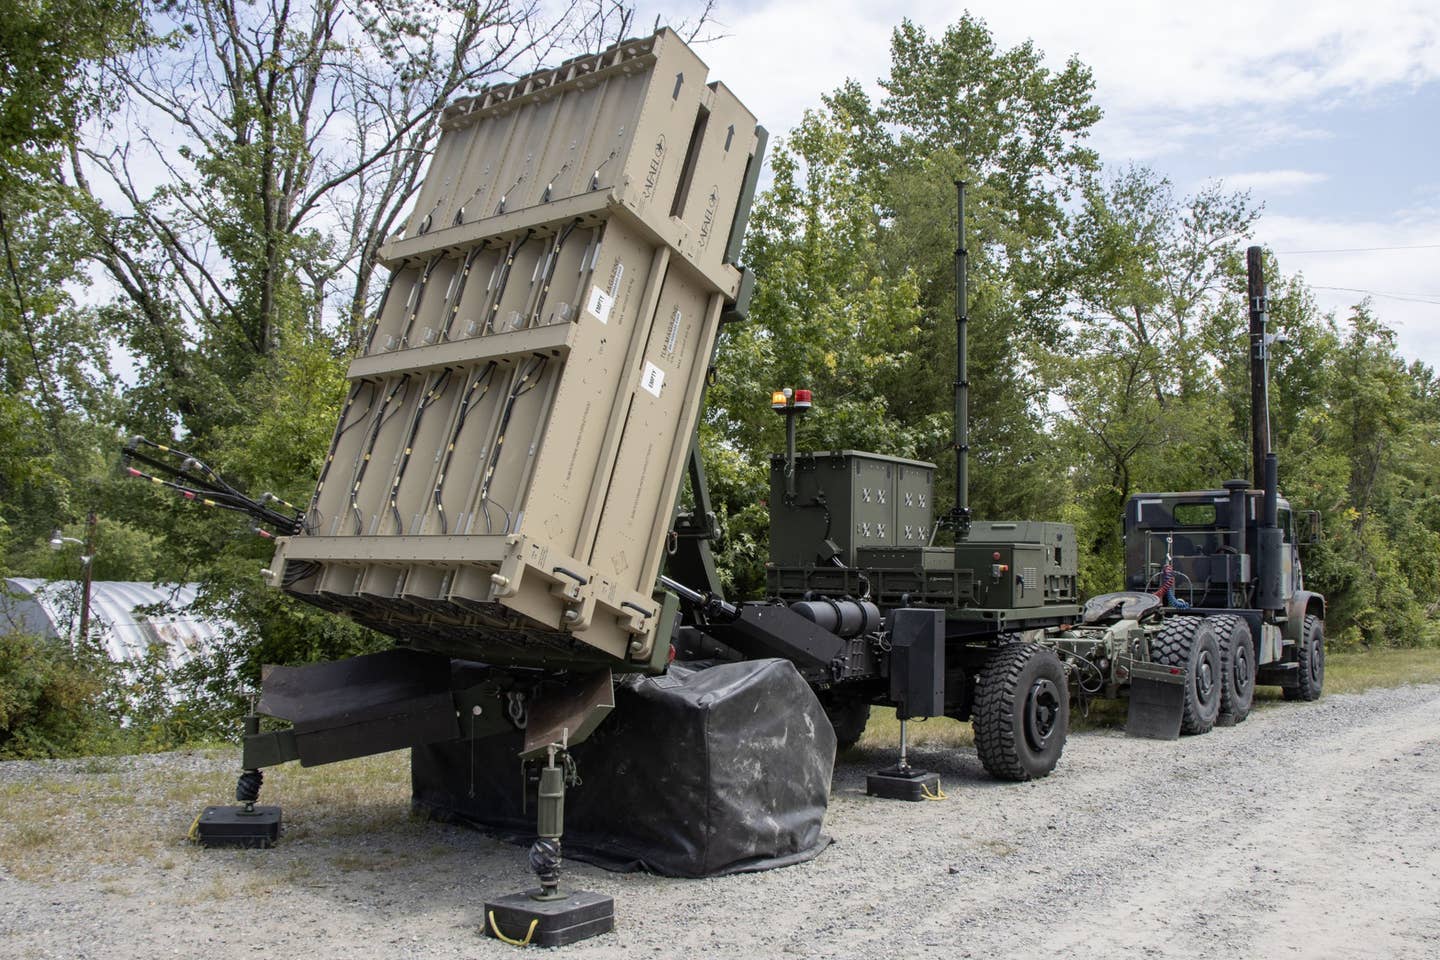 A Marine Corps MRIC Expeditionary Launcher. A total of 10 Tamir missile canisters are seen here loaded on the launcher, which can hold up to 20 at a time. USMC